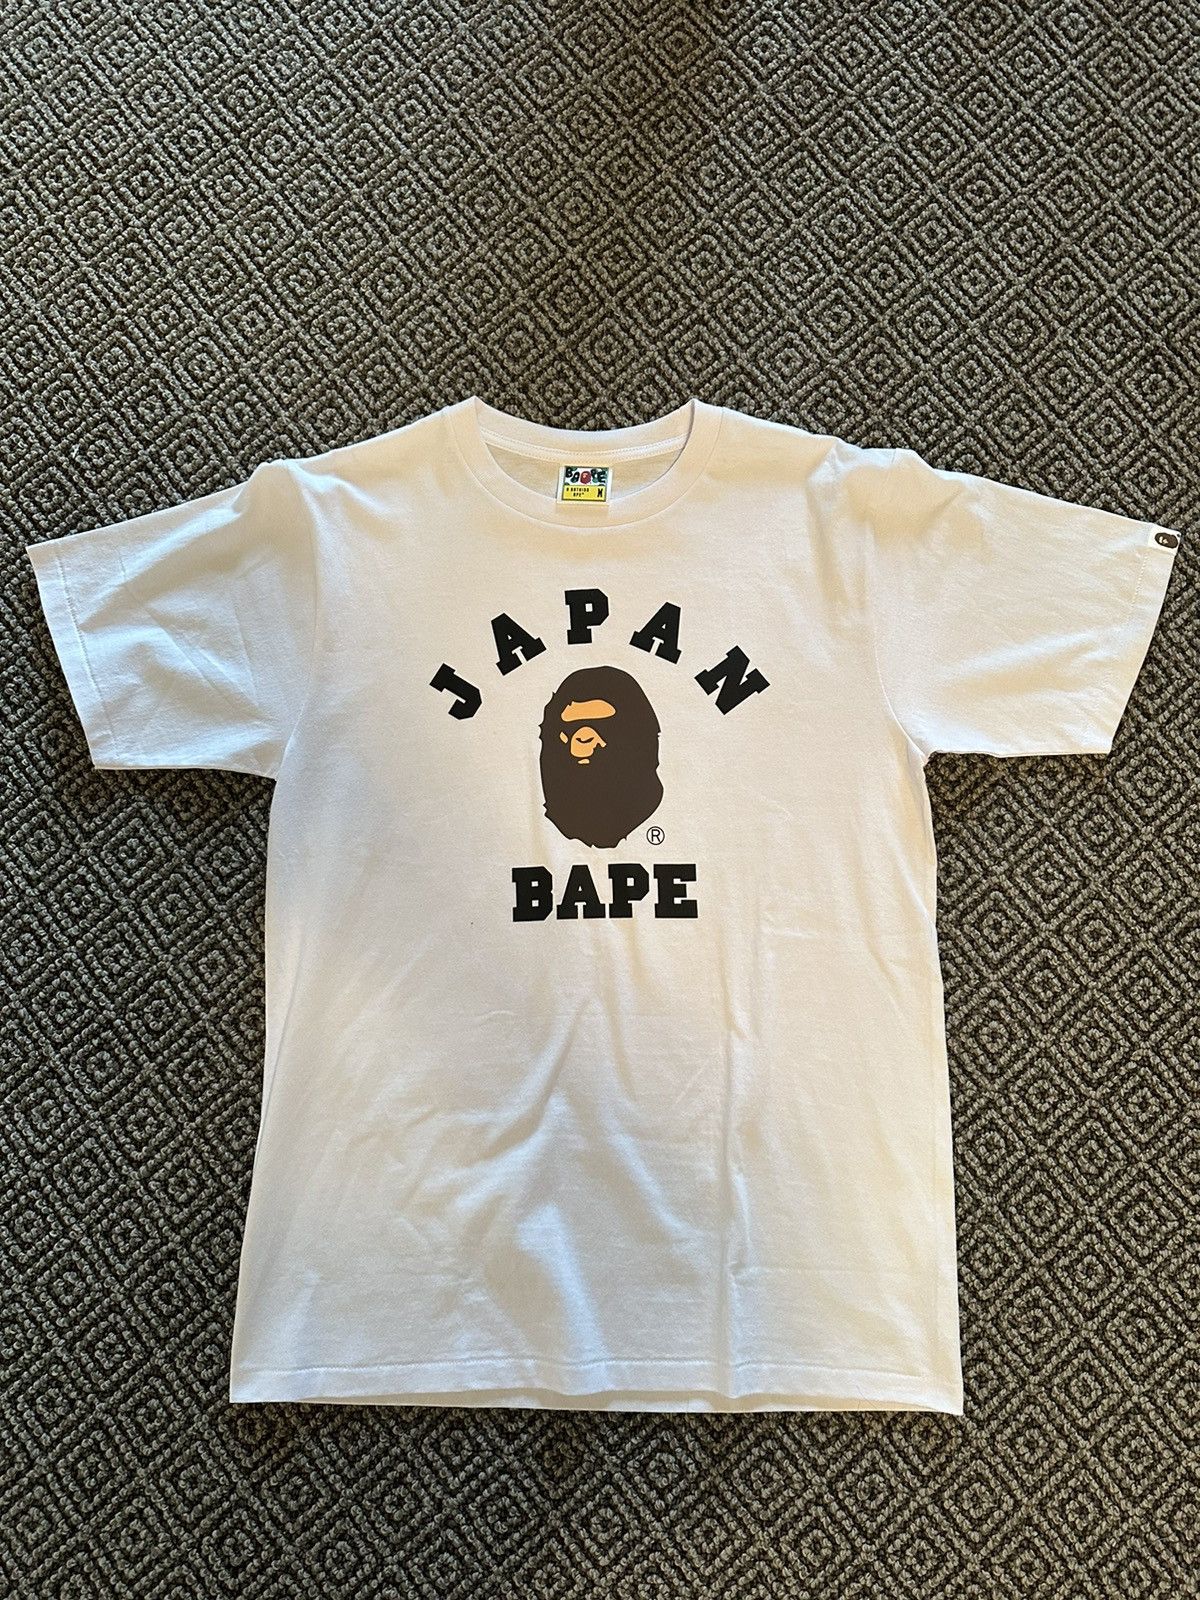 Pre-owned Bape Japan College City White Tee